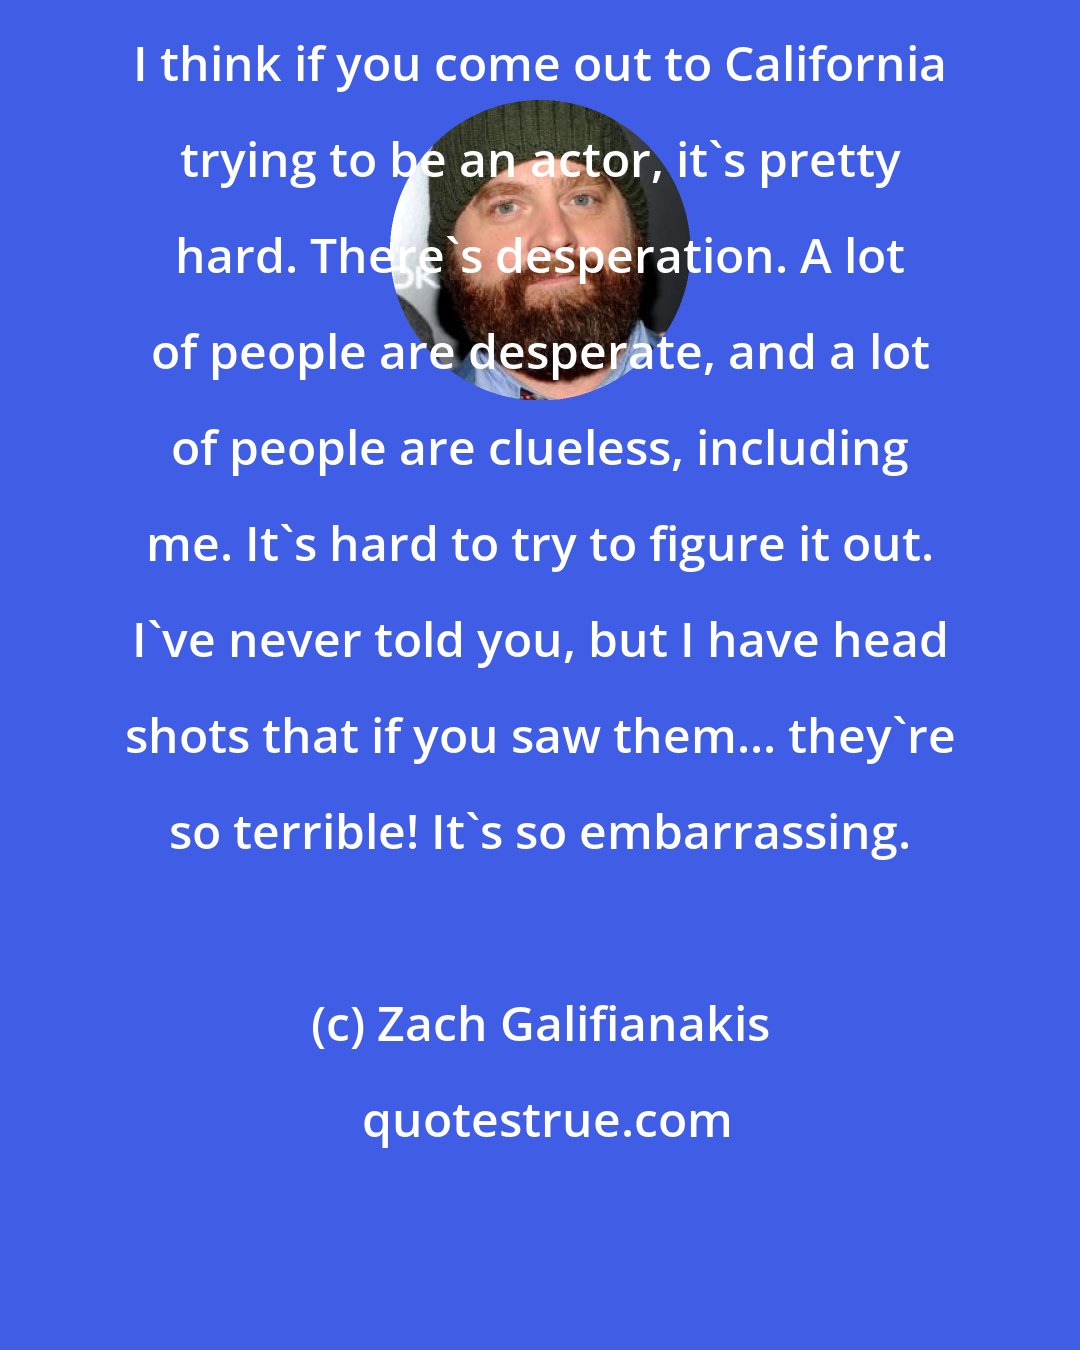 Zach Galifianakis: I think if you come out to California trying to be an actor, it's pretty hard. There's desperation. A lot of people are desperate, and a lot of people are clueless, including me. It's hard to try to figure it out. I've never told you, but I have head shots that if you saw them... they're so terrible! It's so embarrassing.